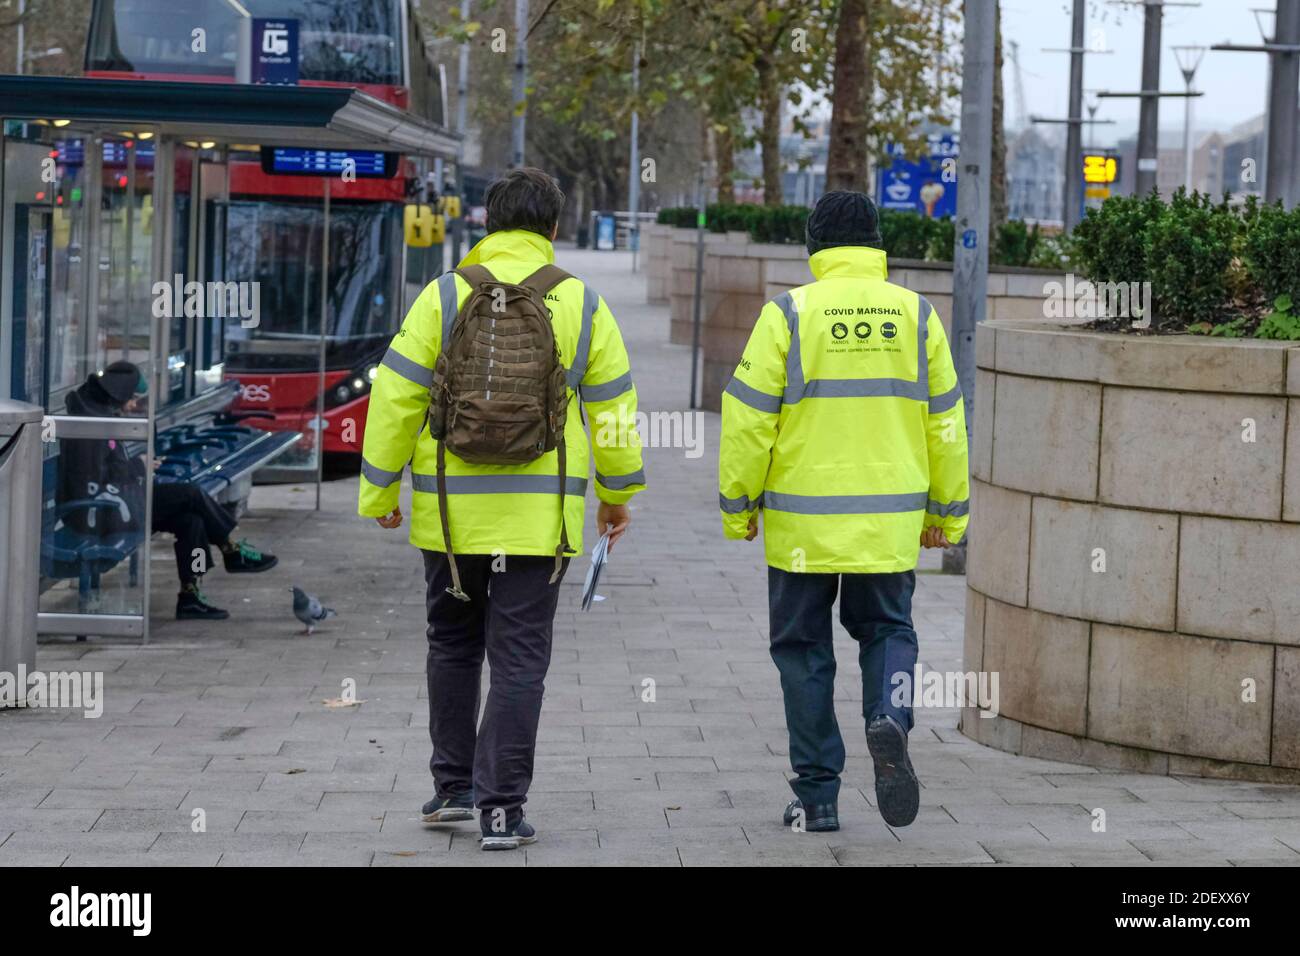 Bristol, UK. 2nd Dec, 2020. Non-essential shops are now open in tier 3 Bristol, bringing people into the city. Covid marshals keeping people safe. Credit: JMF News/Alamy Live News Stock Photo